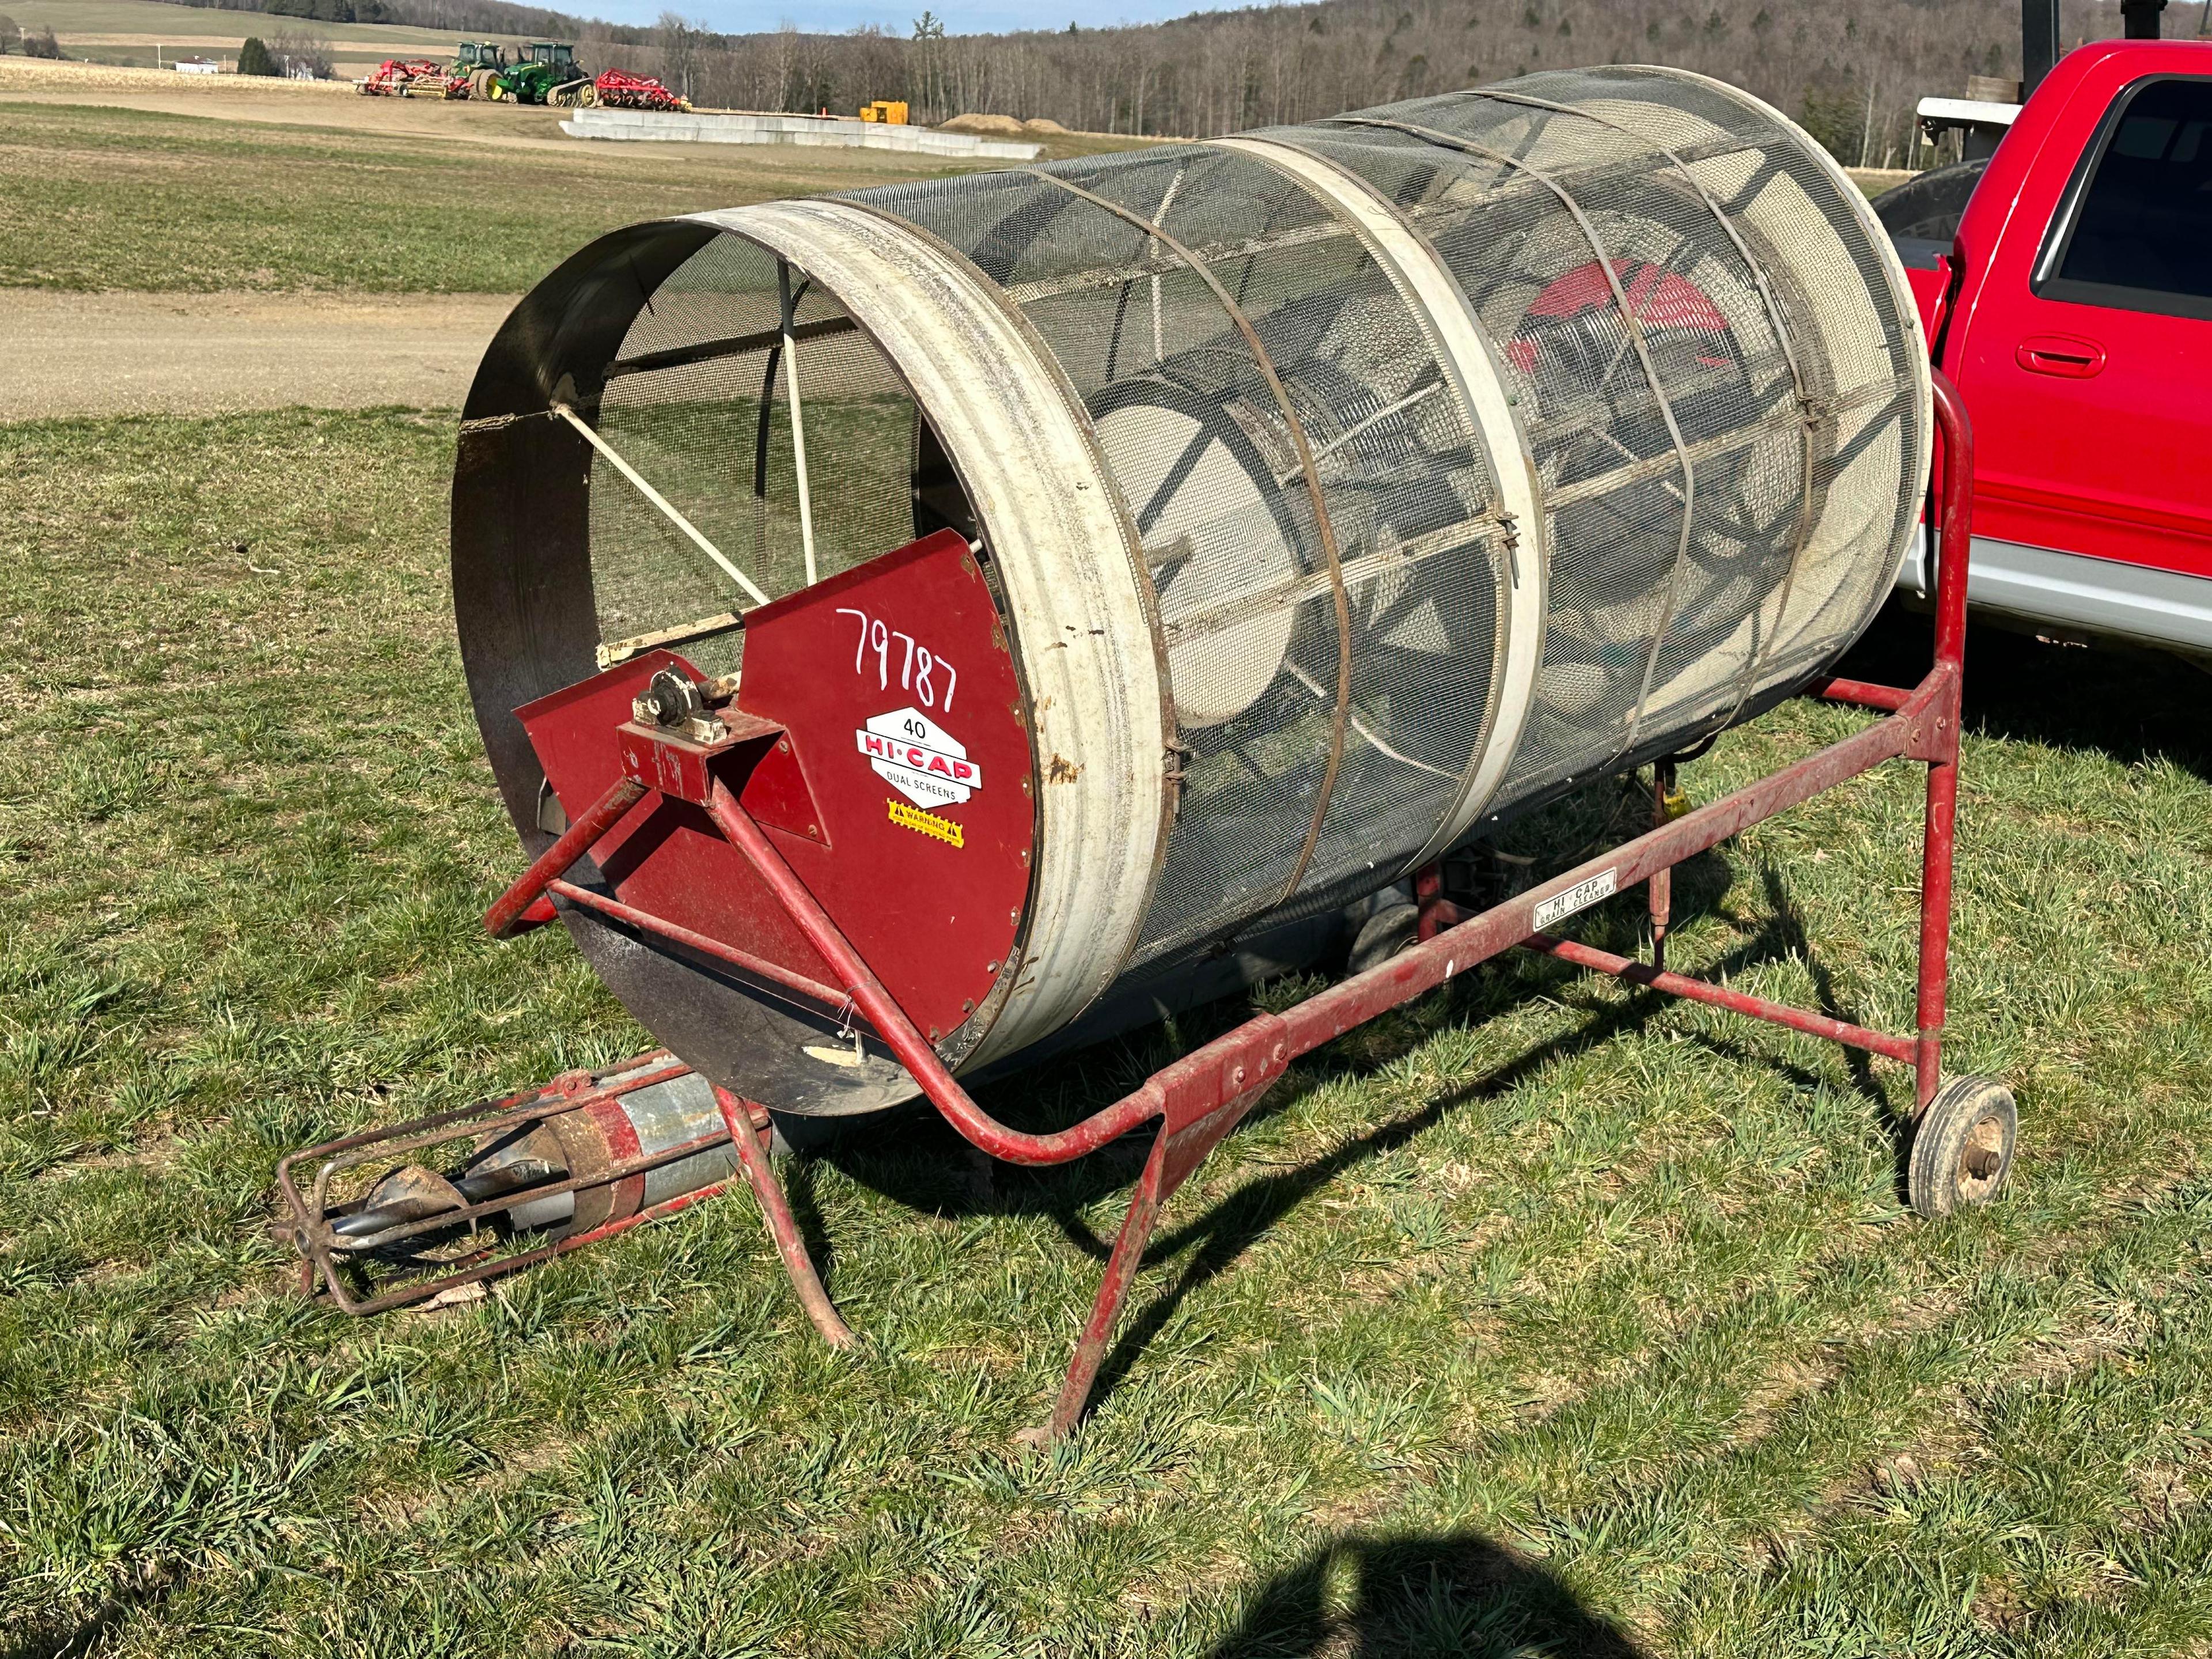 DMC Hi-Cap 40 Grain Cleaner With 7’ Loading Auger, 1 Phase